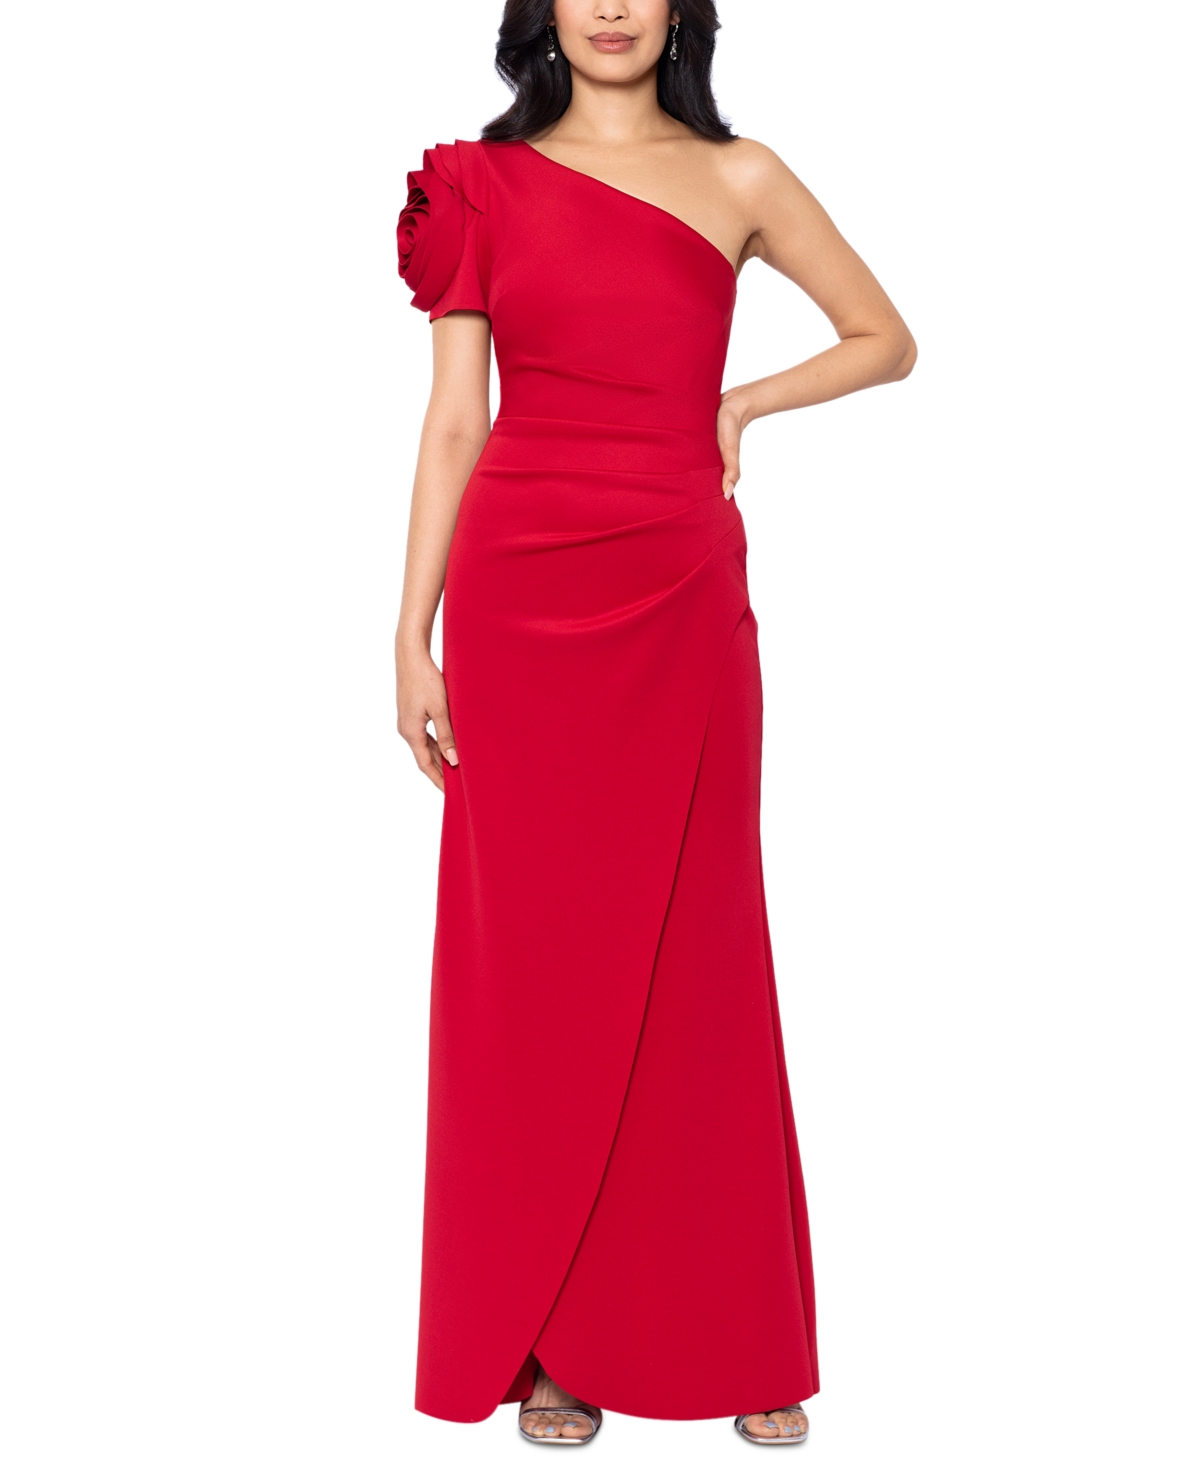 Women's Floral-Sleeve One-Shoulder Gown - Red